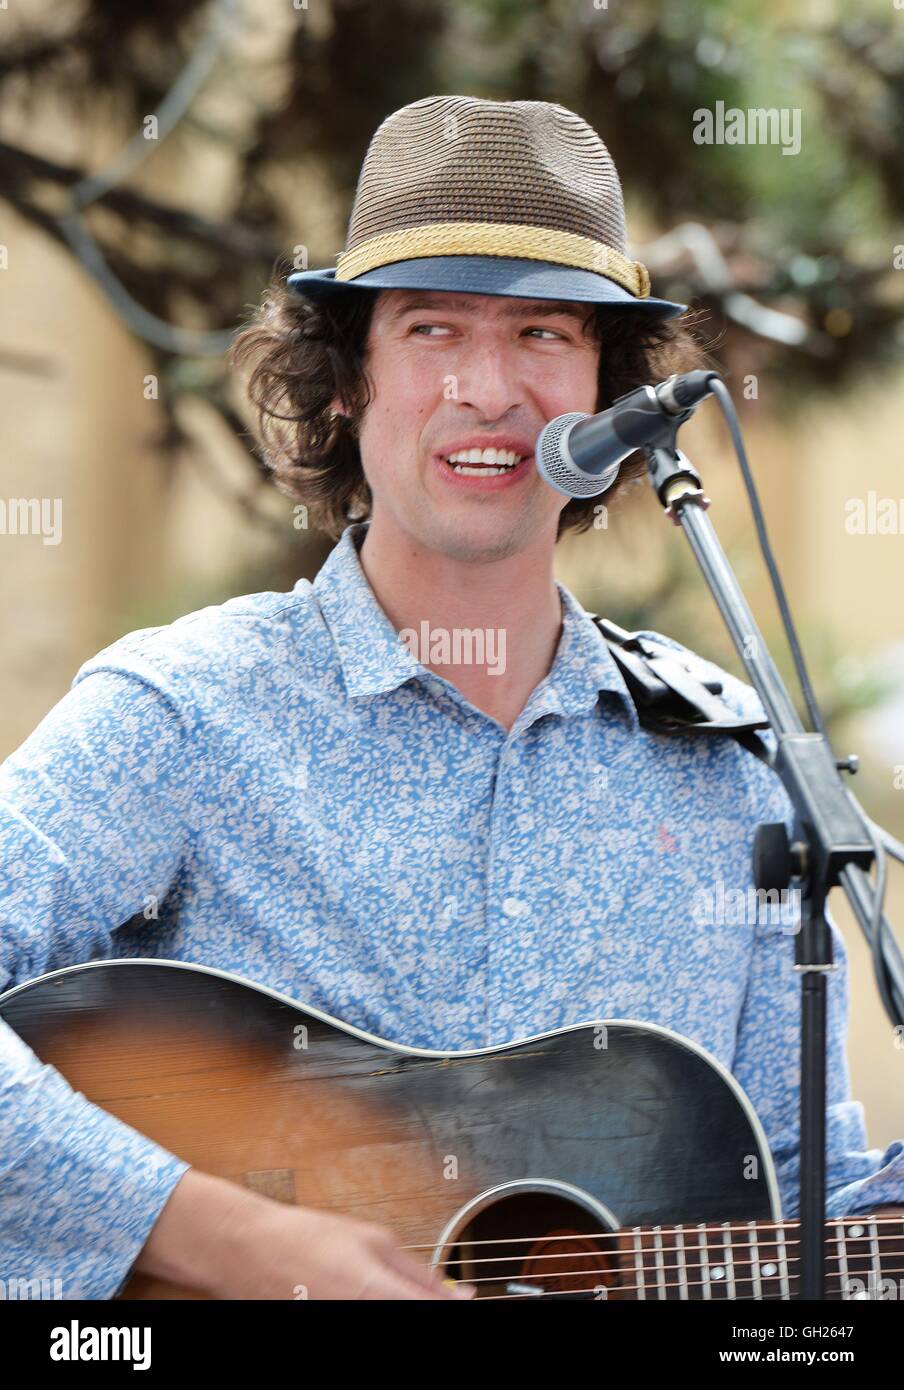 Jonny Walker sings during a protest against new local council Public Space Protection Orders (PSPO), in Gillett Square Dalston, London. Stock Photo